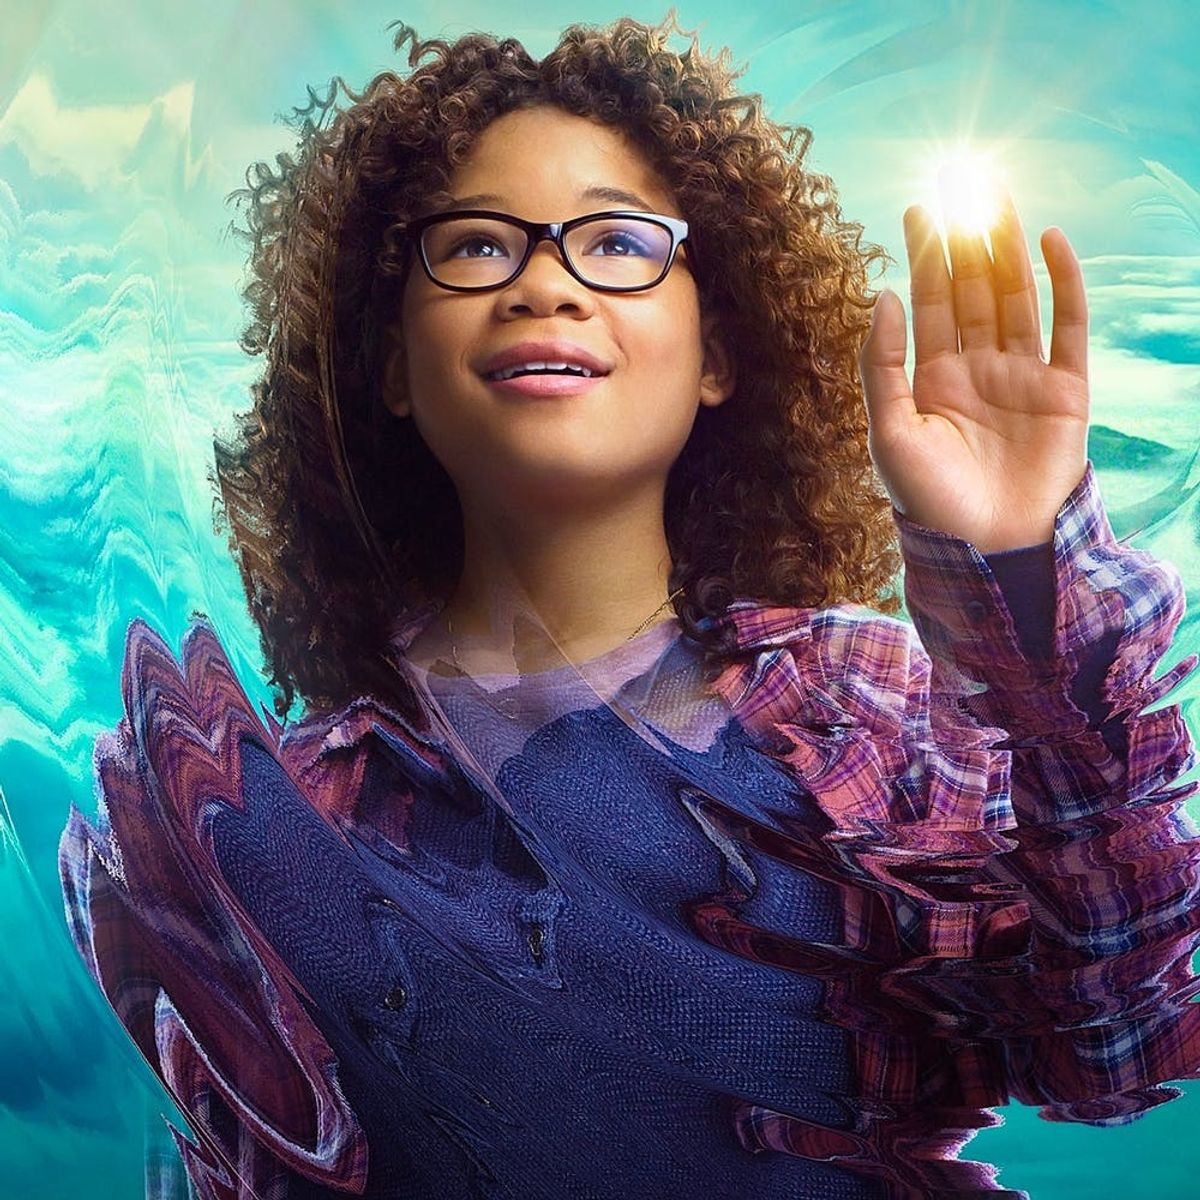 AMC Is Giving Away Free ‘A Wrinkle in Time’ Tickets to Underprivileged Kids